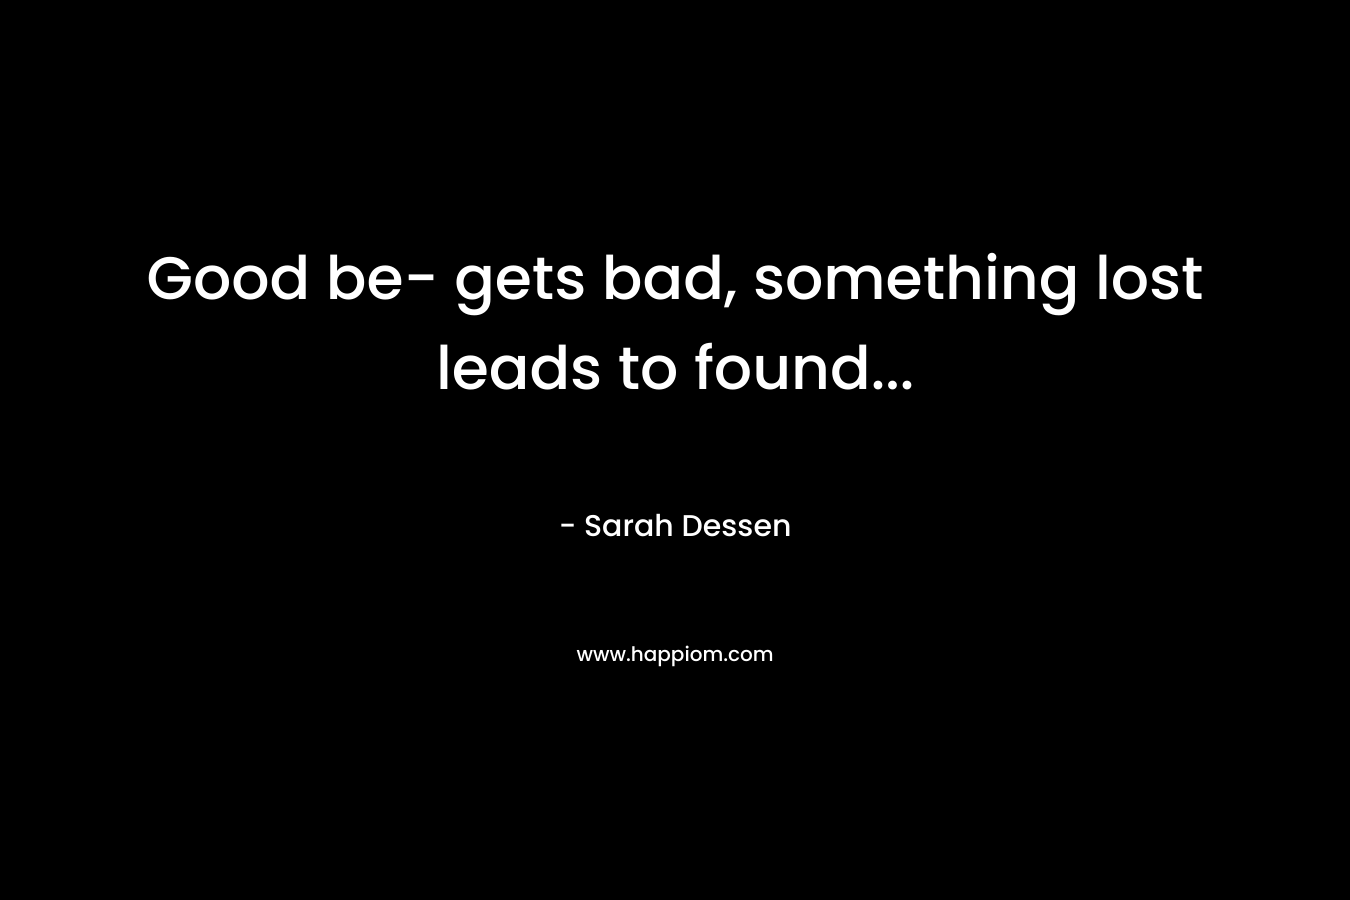 Good be- gets bad, something lost leads to found...